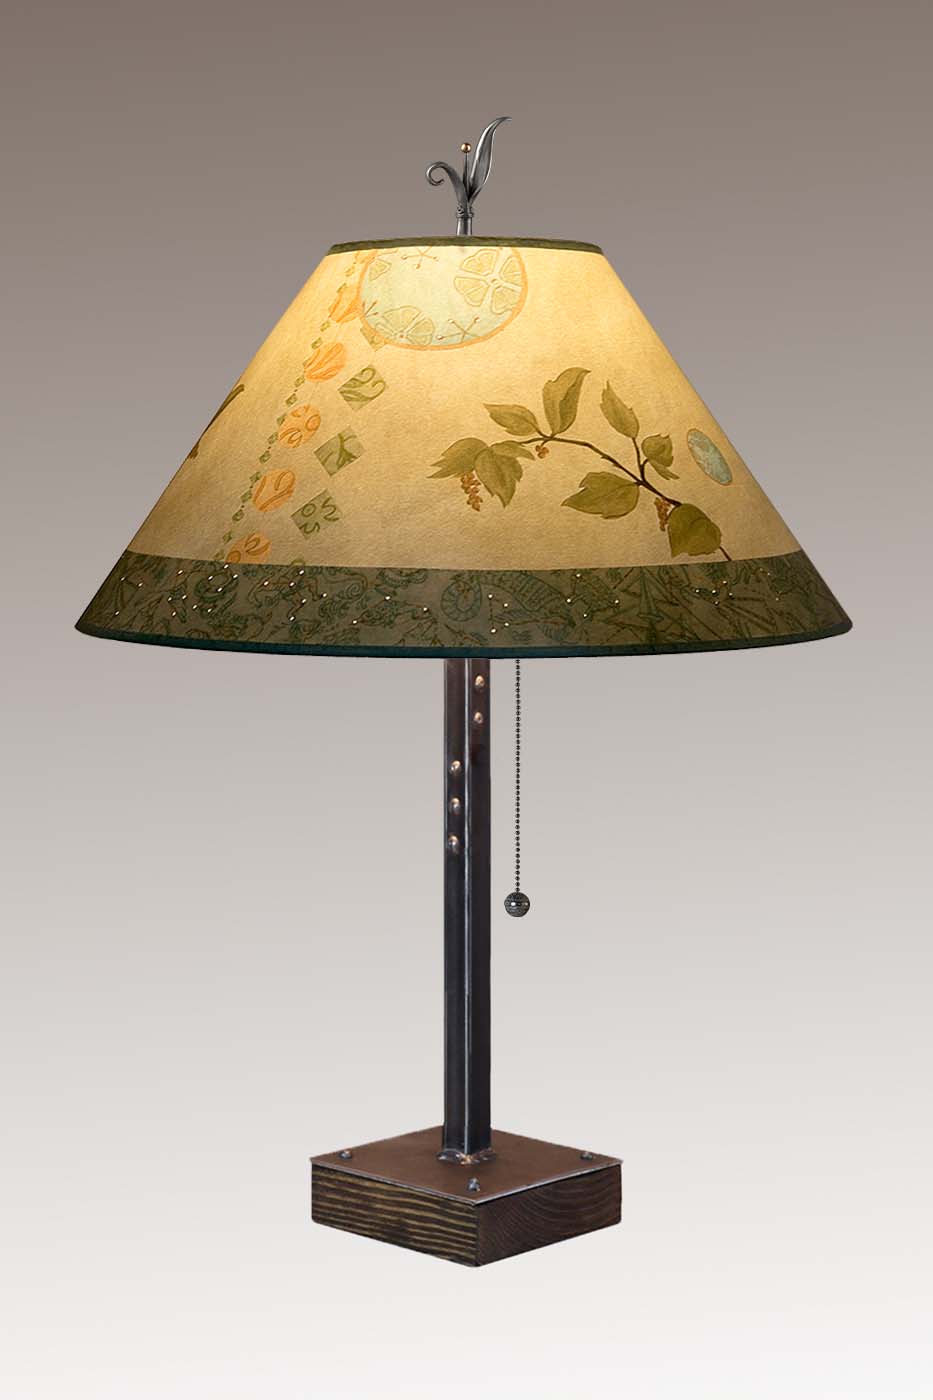 Janna Ugone &amp; Co Table Lamp Steel Table Lamp on Wood with Large Conical Shade in Celestial Leaf